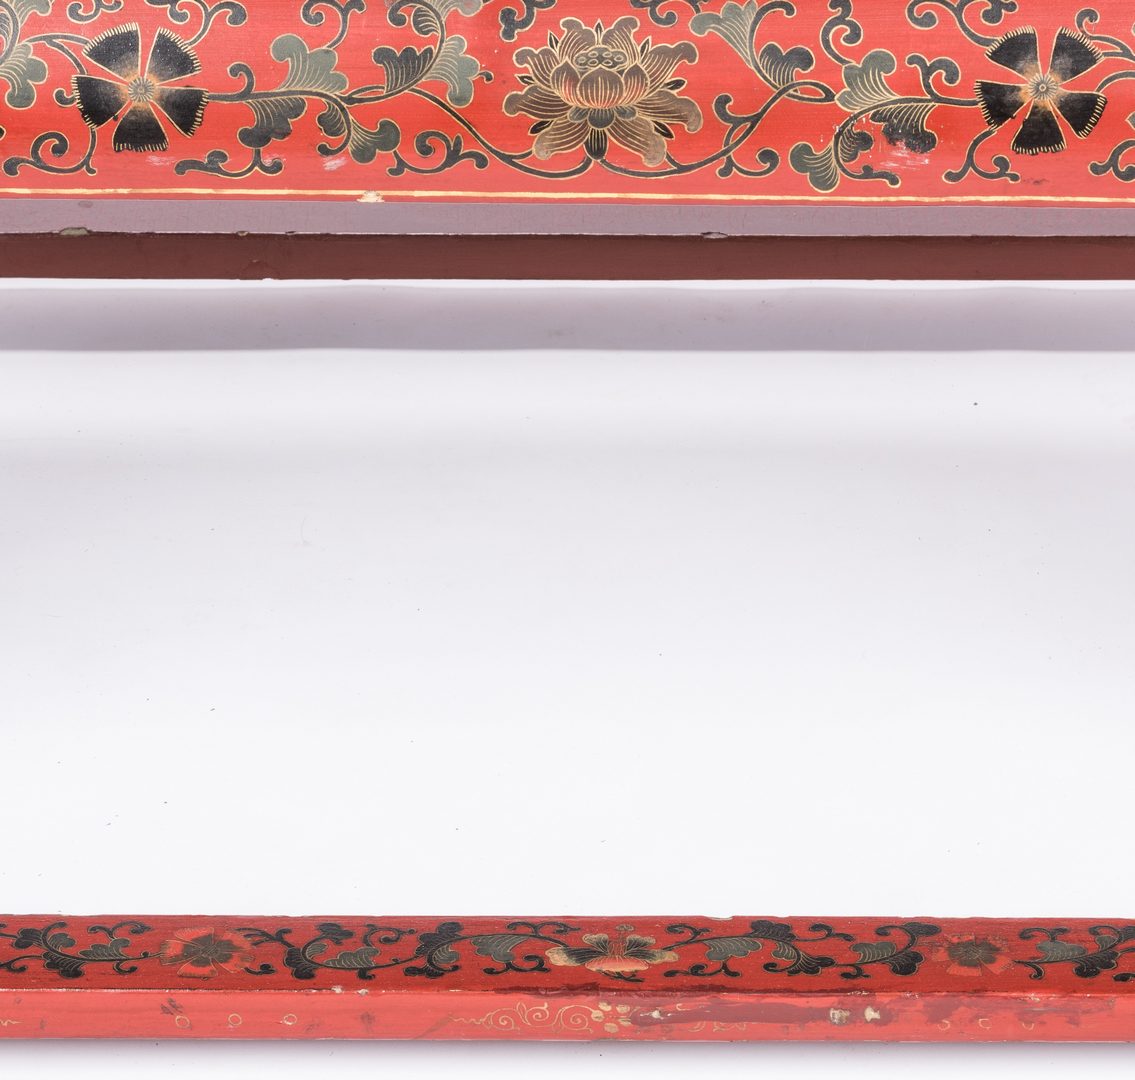 Lot 35: Chinese Red Lacquer Throne Chair